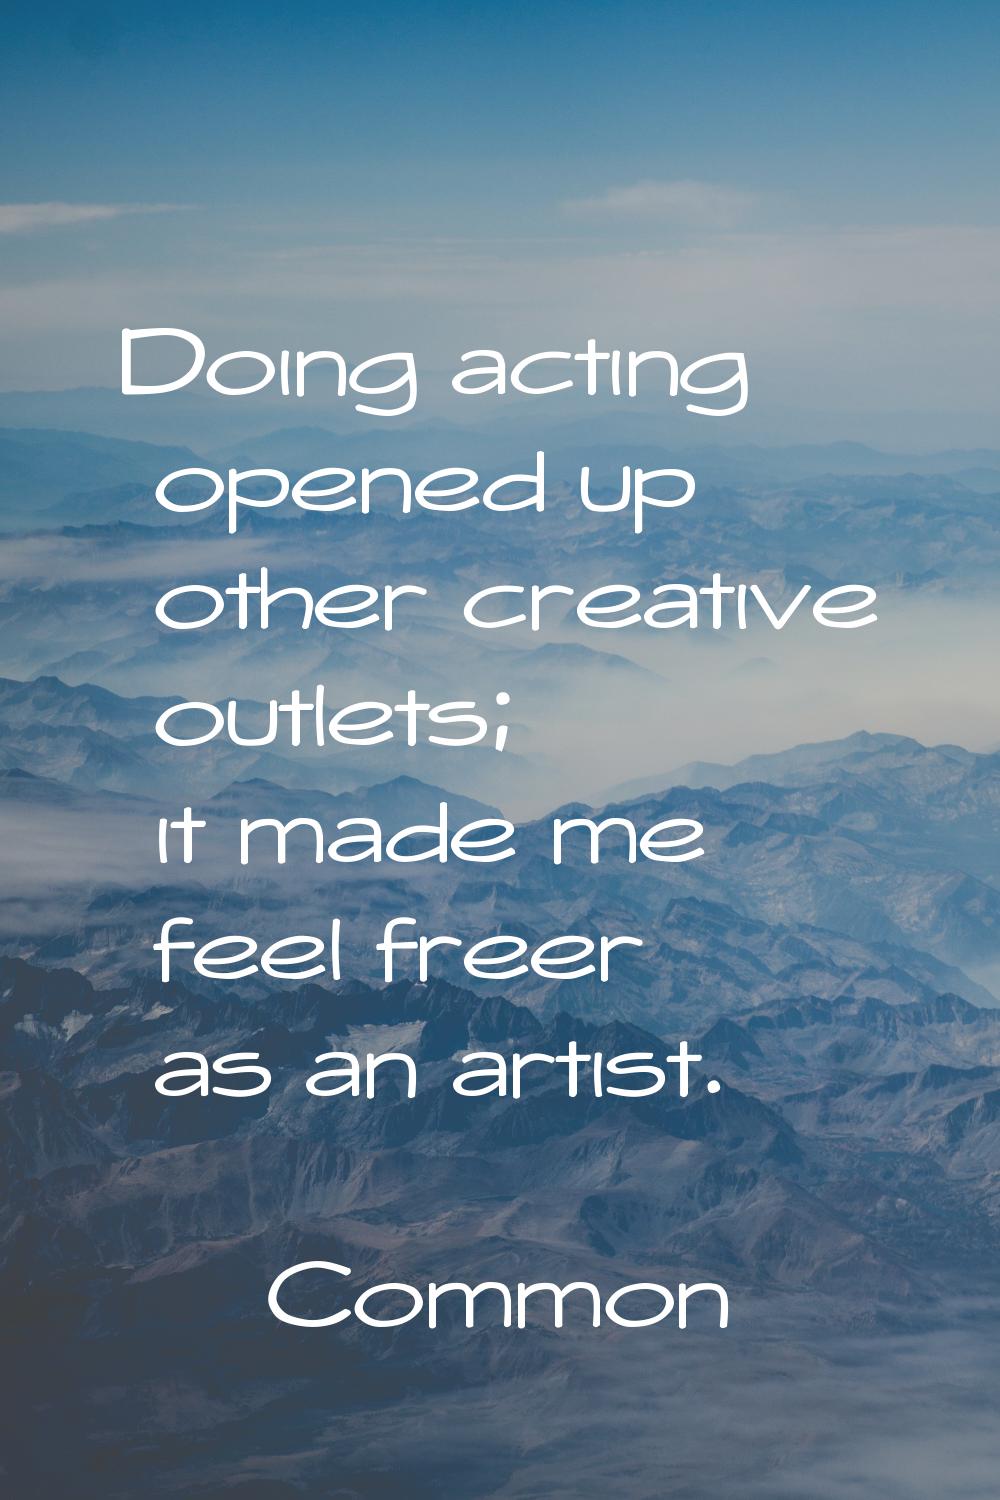 Doing acting opened up other creative outlets; it made me feel freer as an artist.